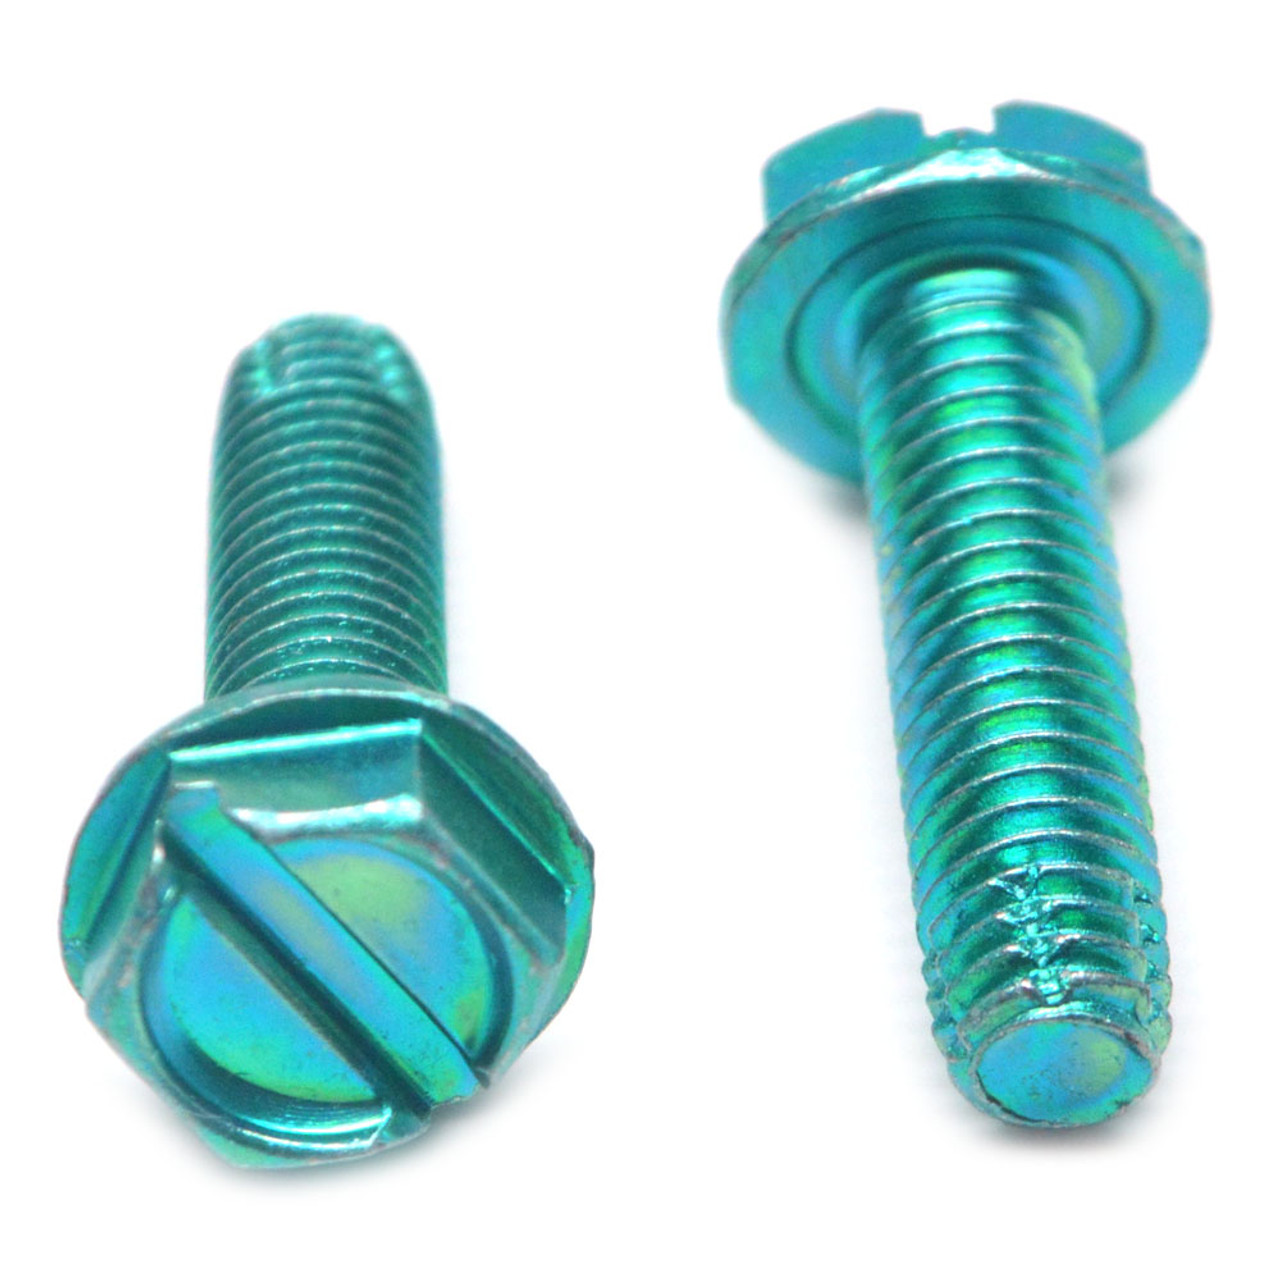 #10-32 x 3/4" (FT) Fine Thread Thread Cutting Screw Slotted Hex Washer Head Type F Low Carbon Steel Green Zinc Plated